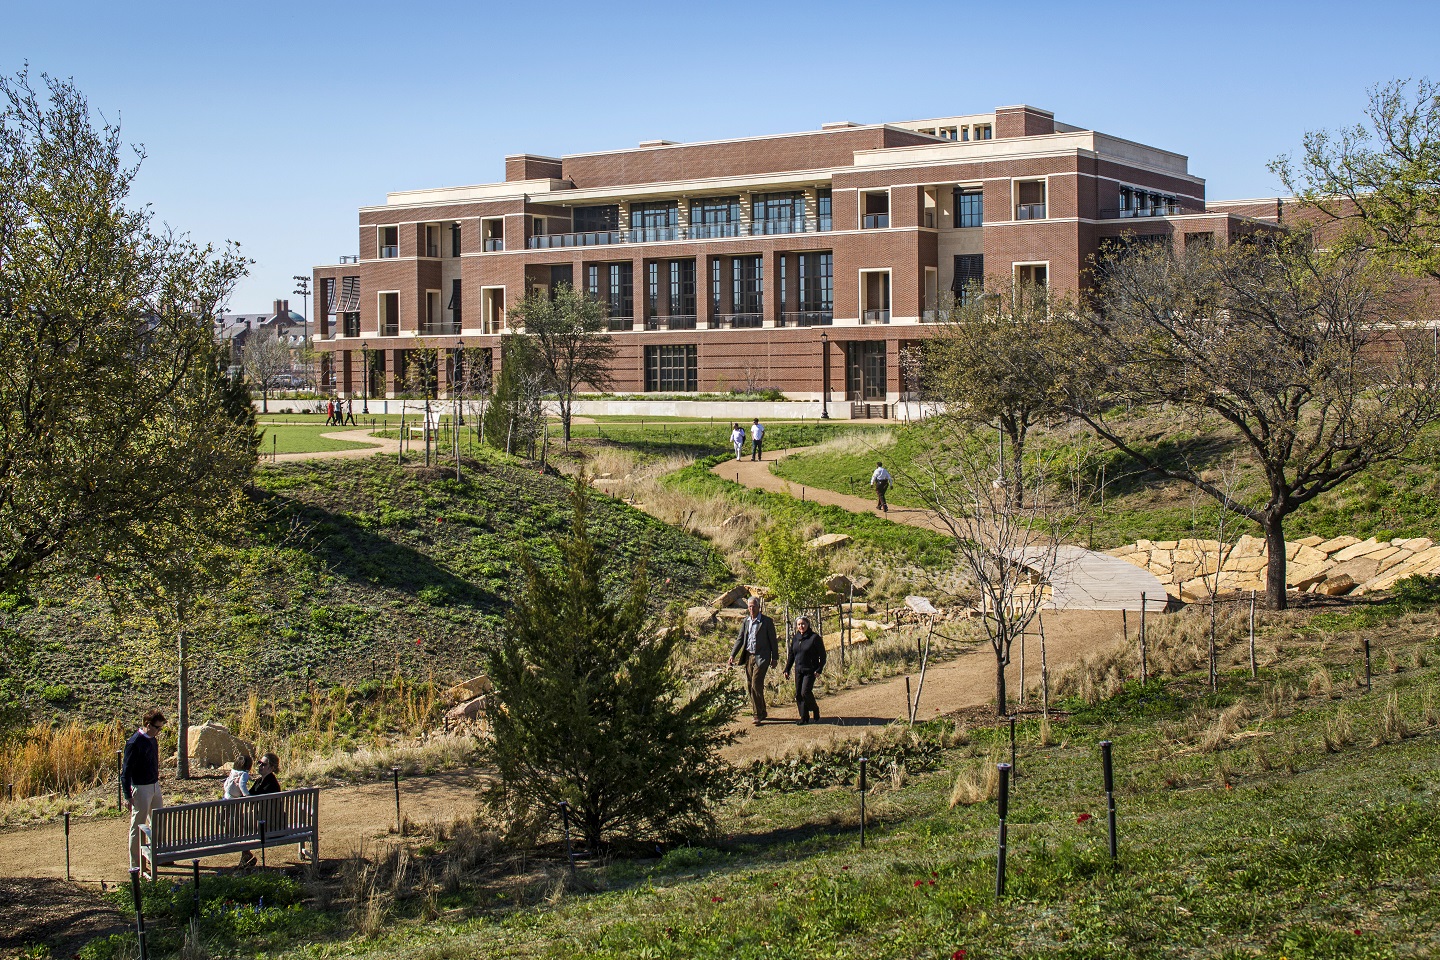 At SMU's Community Day, families can hunt for blooms on a wildflower scavenger hunt, plant wildflower seeds to bring home and enjoy SMU student musical performances at the Native Texas Park at the George W. Bush Presidential Center. 